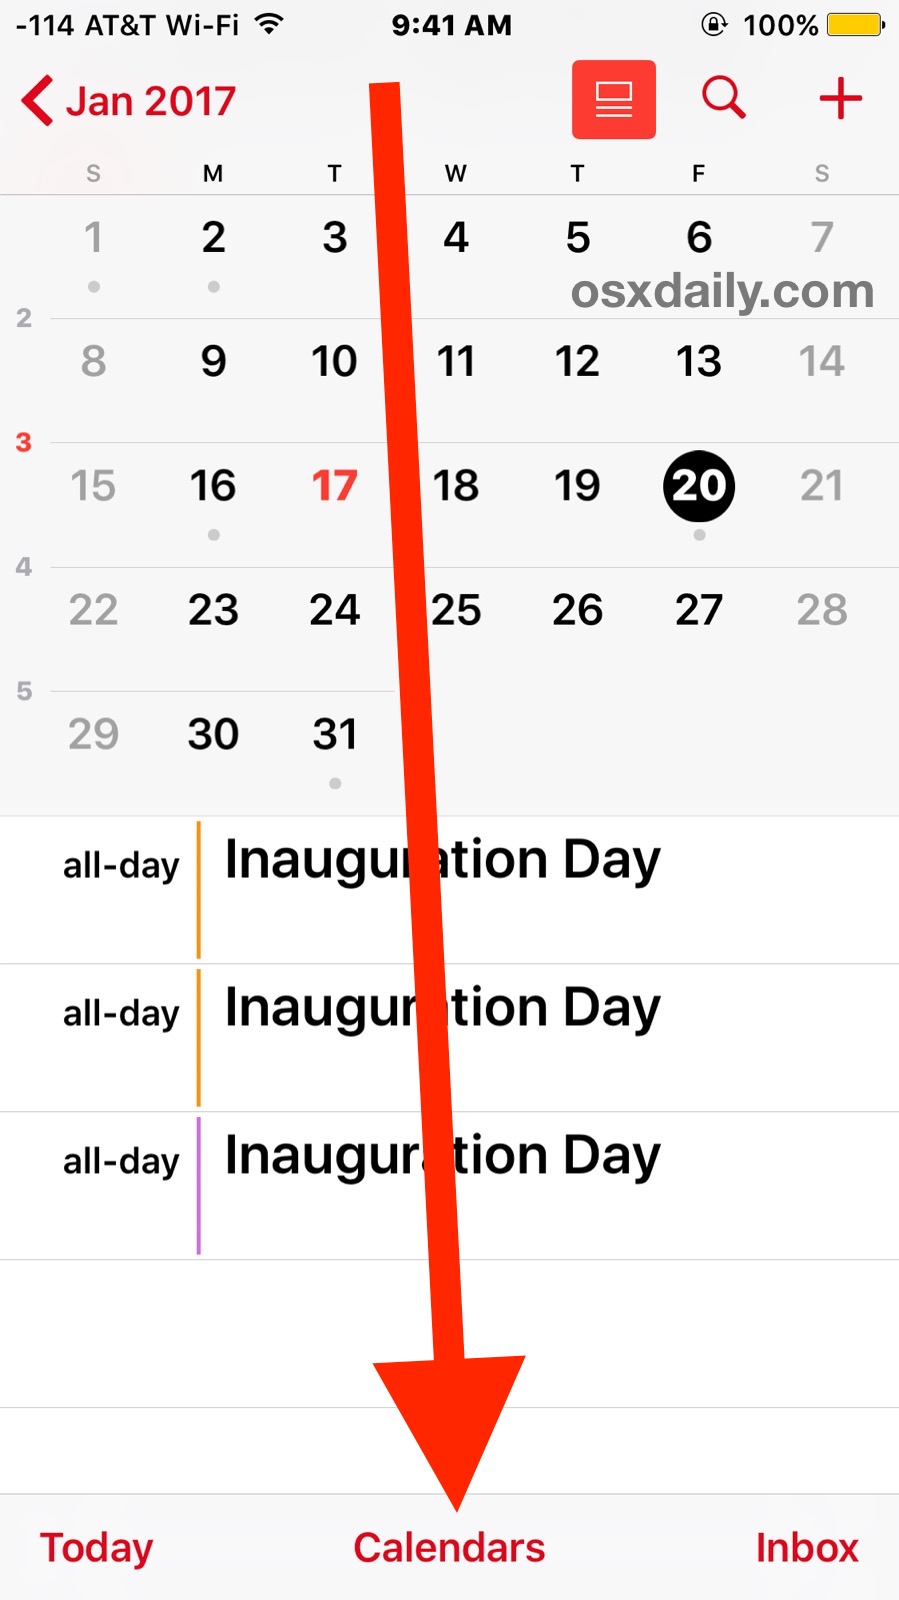 How to Share Calendars from iPhone, iPad